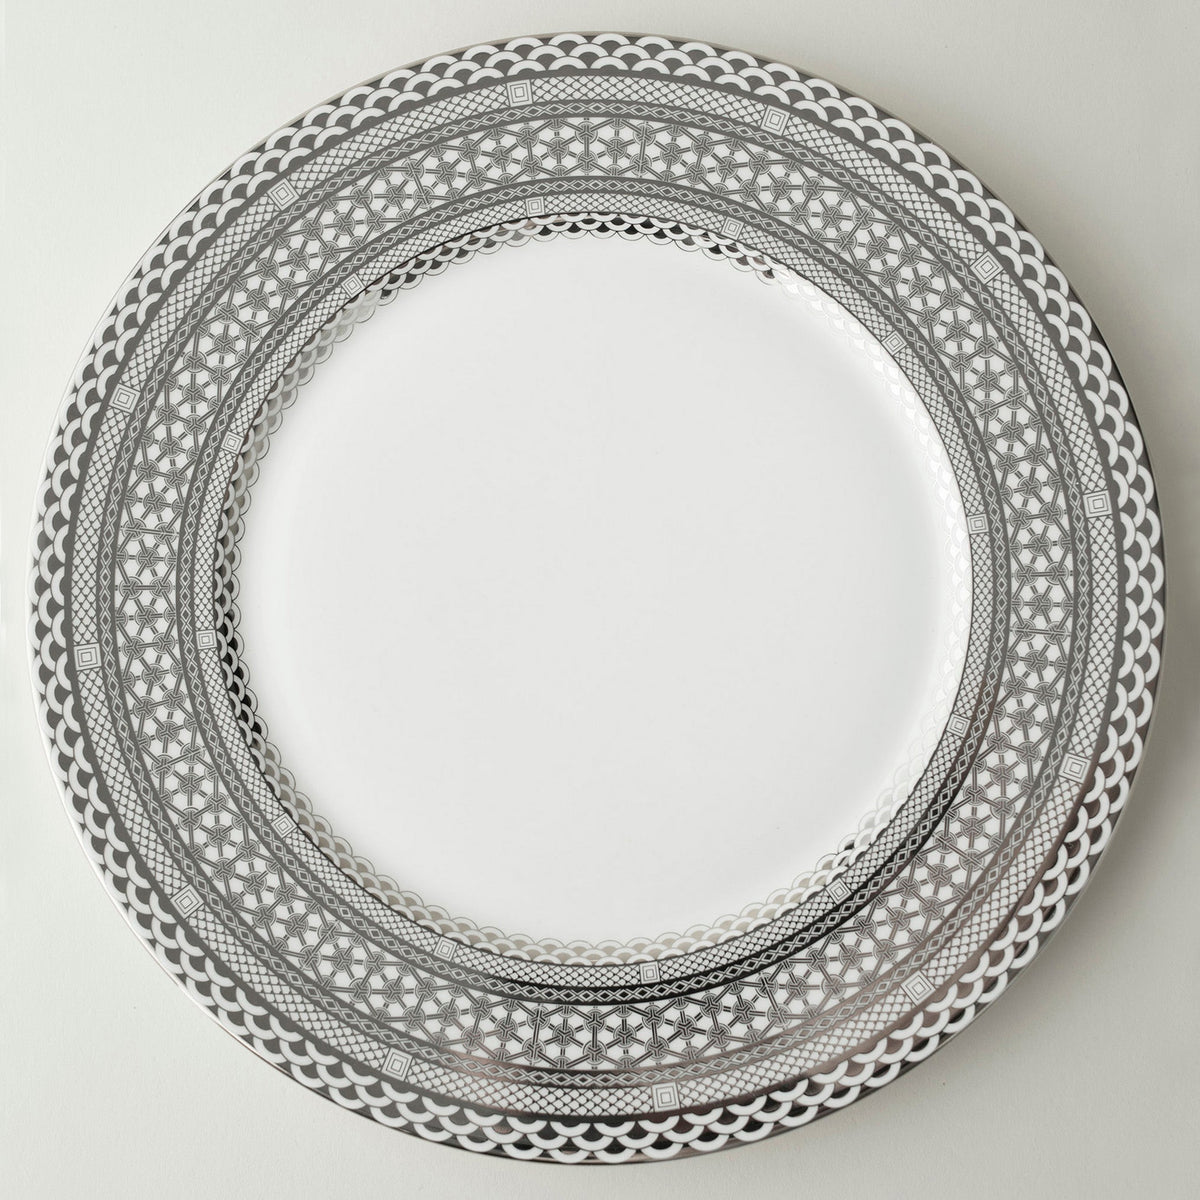 A Caskata Artisanal Home Hawthorne Ice Platinum charger plate with an ornate design on it, made with precious metals.